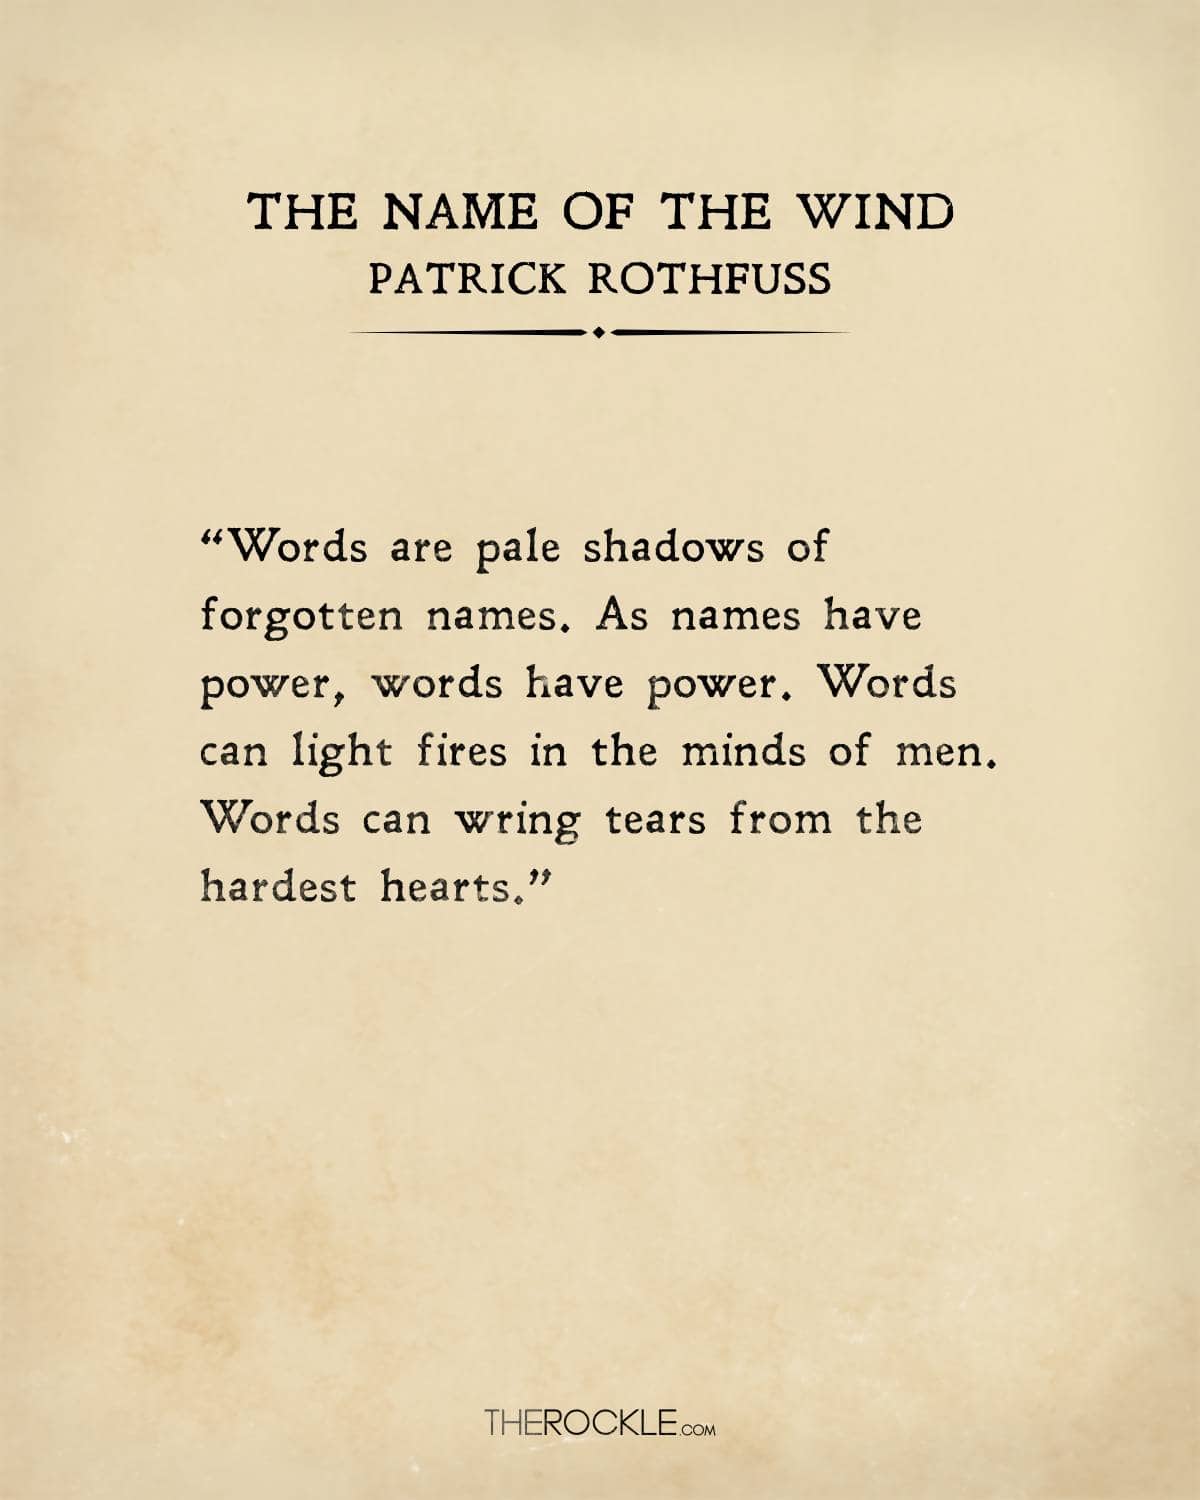 Patrick Rothfuss' quote about the power of words